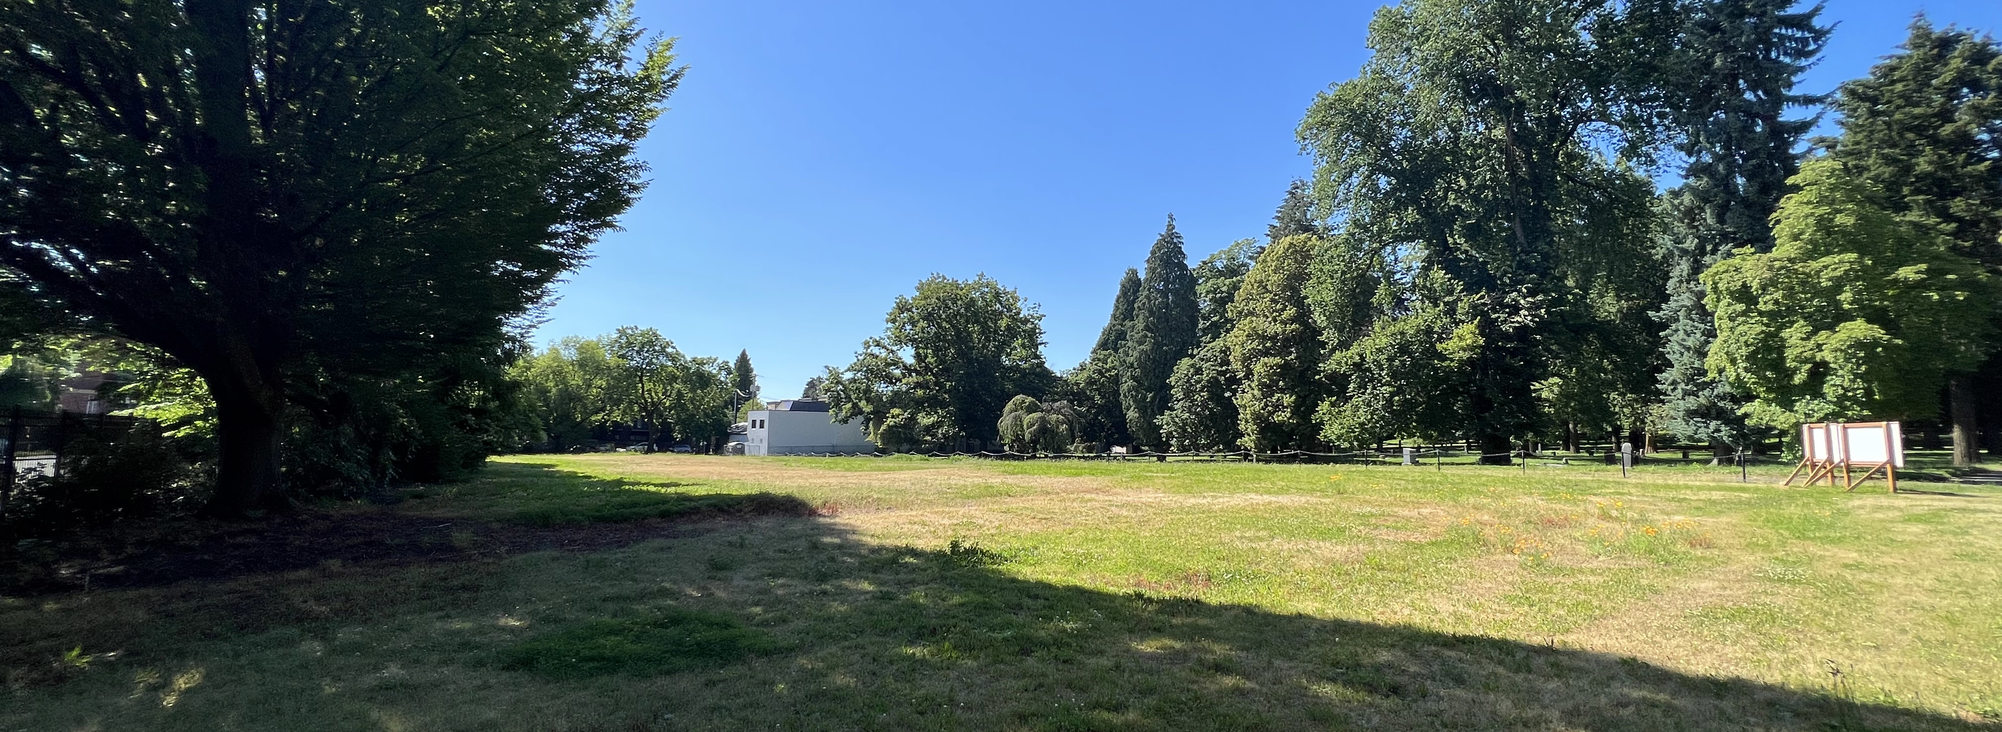 A view of the grassy field in Lone Fir Cemetery known as Block 14. Large, mature deciduous trees are in the distance and cast long shadows on the grass under a clear blue sky.